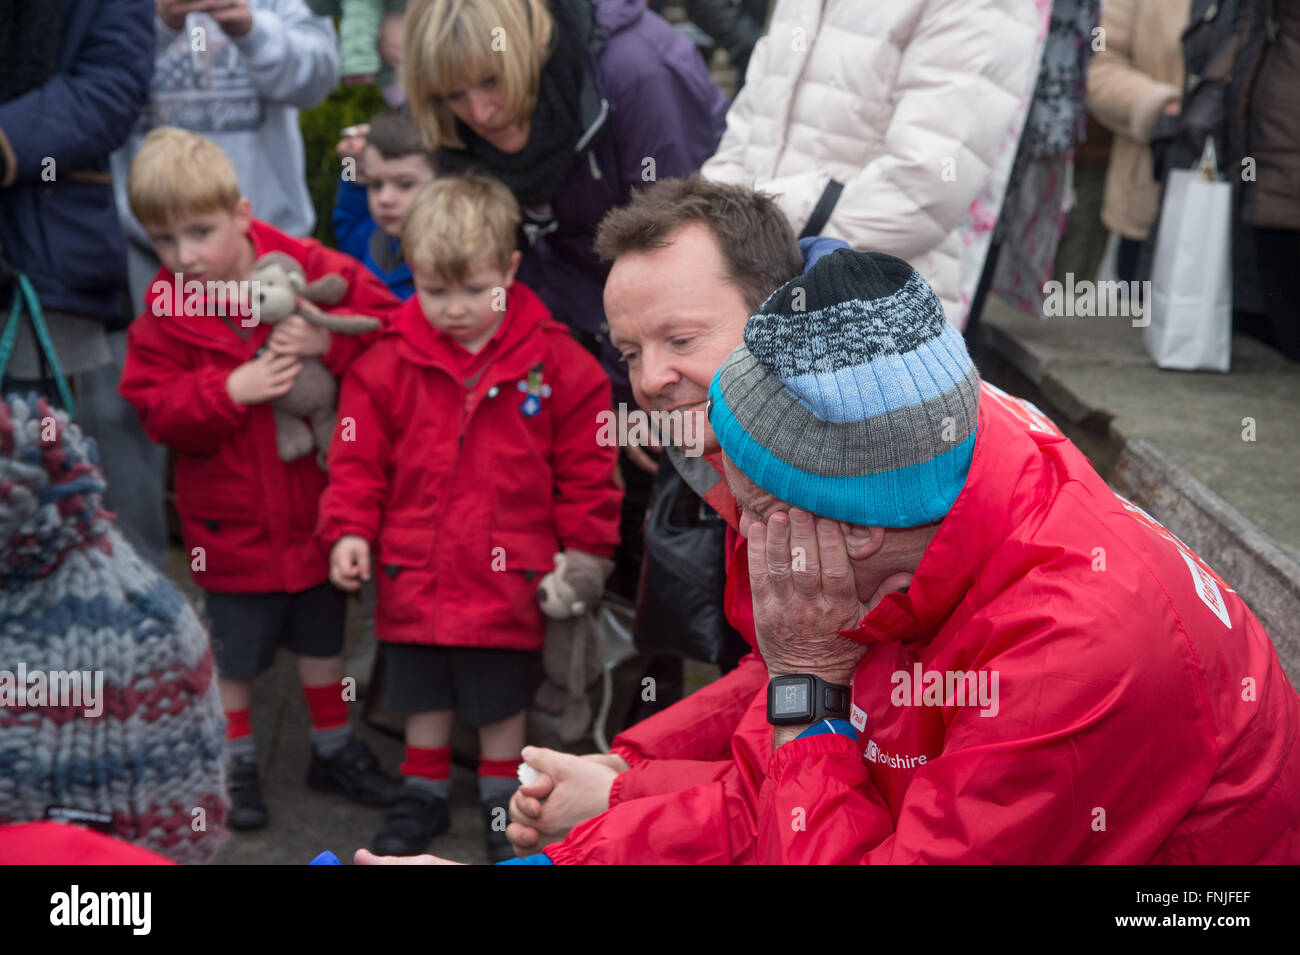 Baildon, West Yorkshire, UK. 15th March, 2016. Look North television presenter Harry Gration and Look North weather man Paul Hudson in Baildon village on day six of their charity three legged walk around Yorkshire for Sport Relief. Credit:  Ian Lamond/Alamy Live News Stock Photo